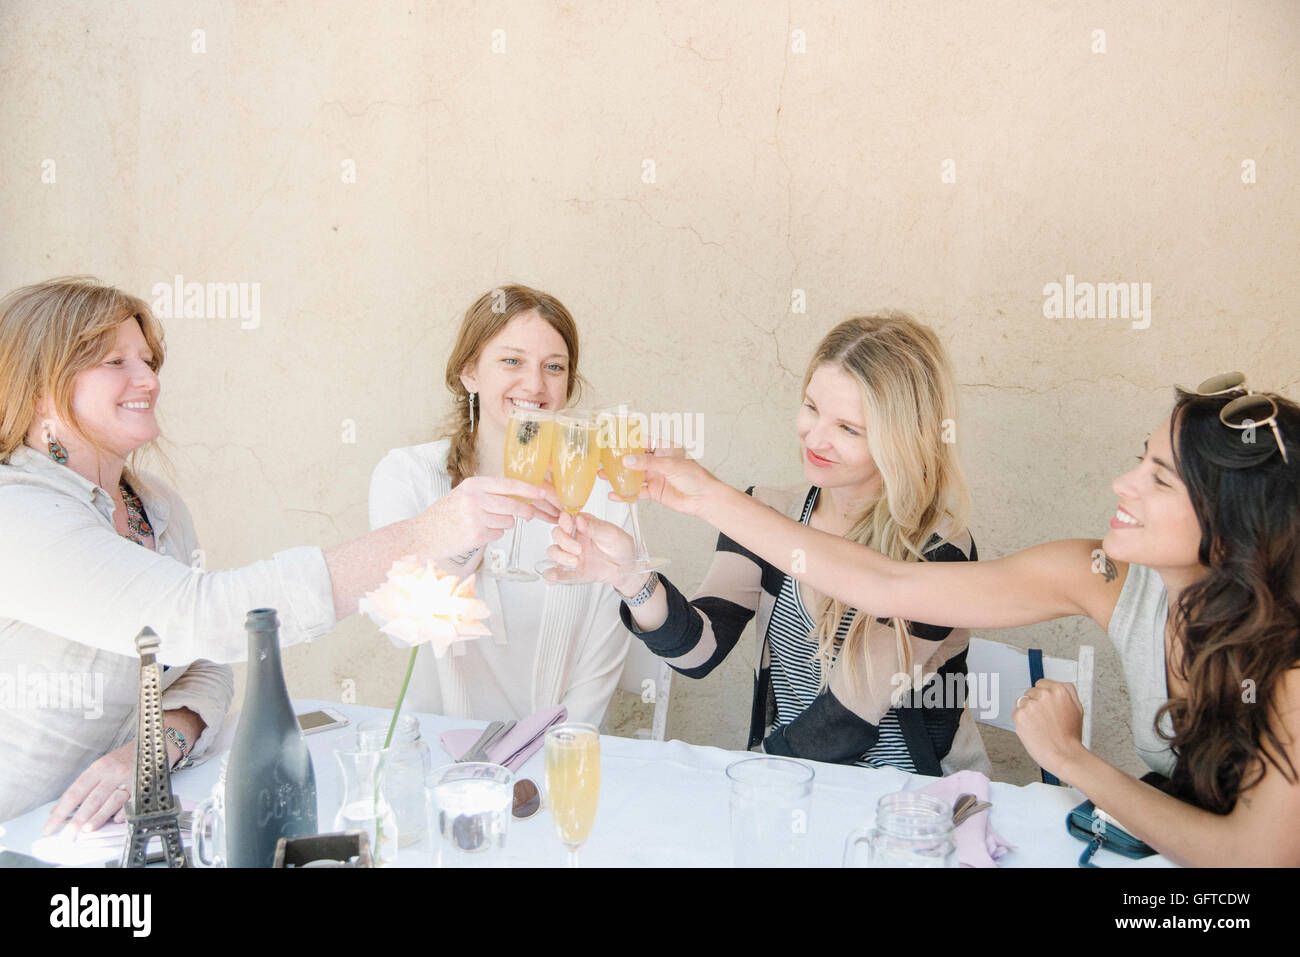 Four smiling women sitting at a table holding glasses of champagne toasting Stock Photo